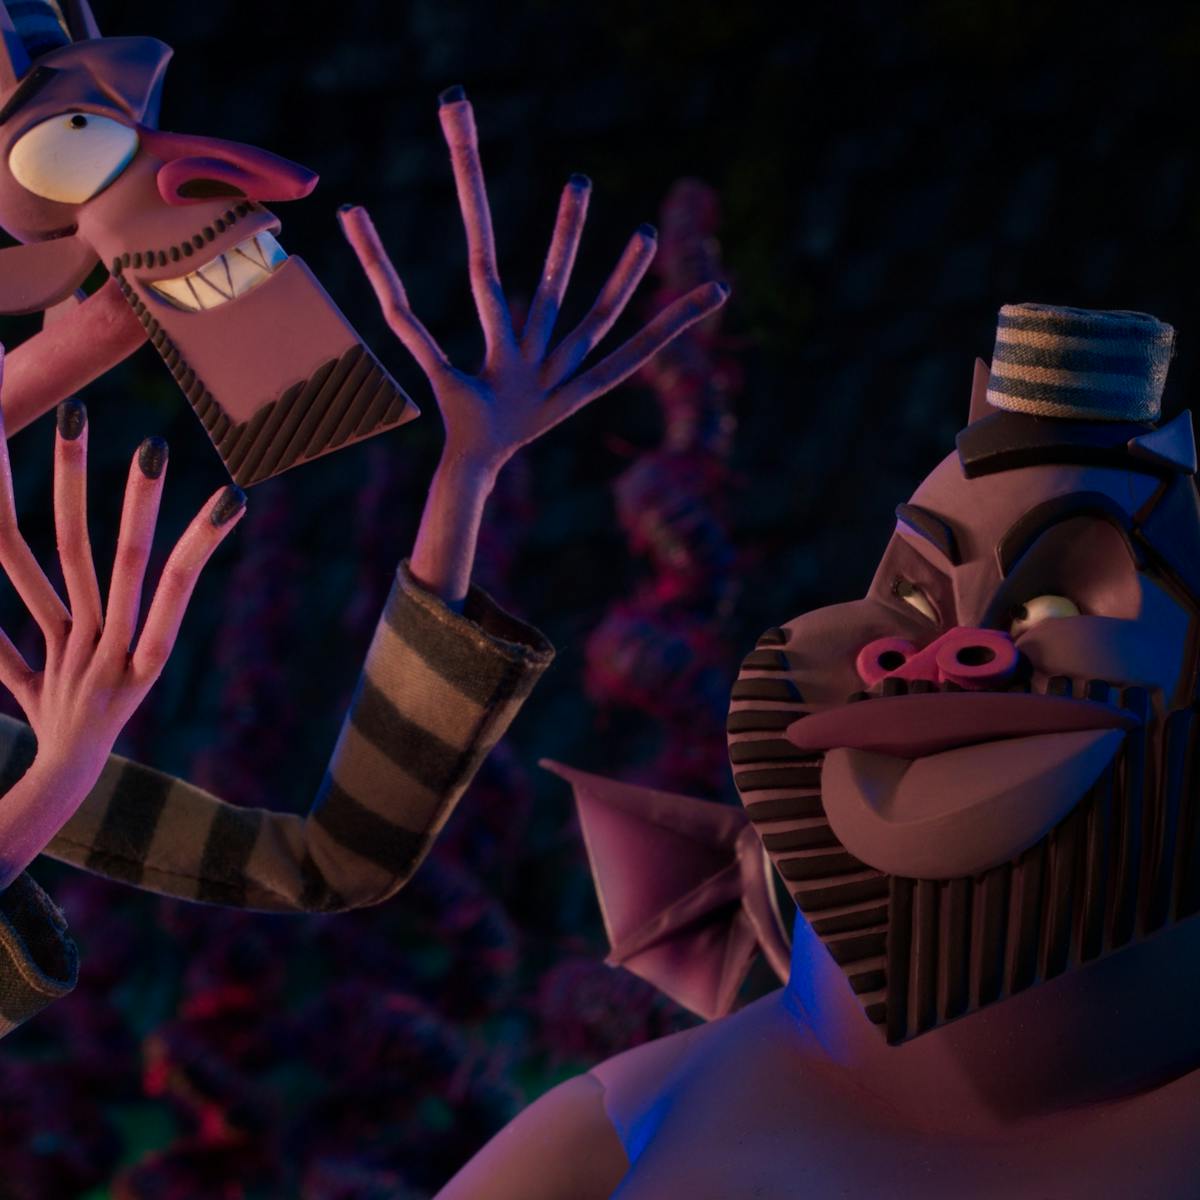 Wendell and Wild talk animatedly in the underworld, in their striped outfits complete with little caps.